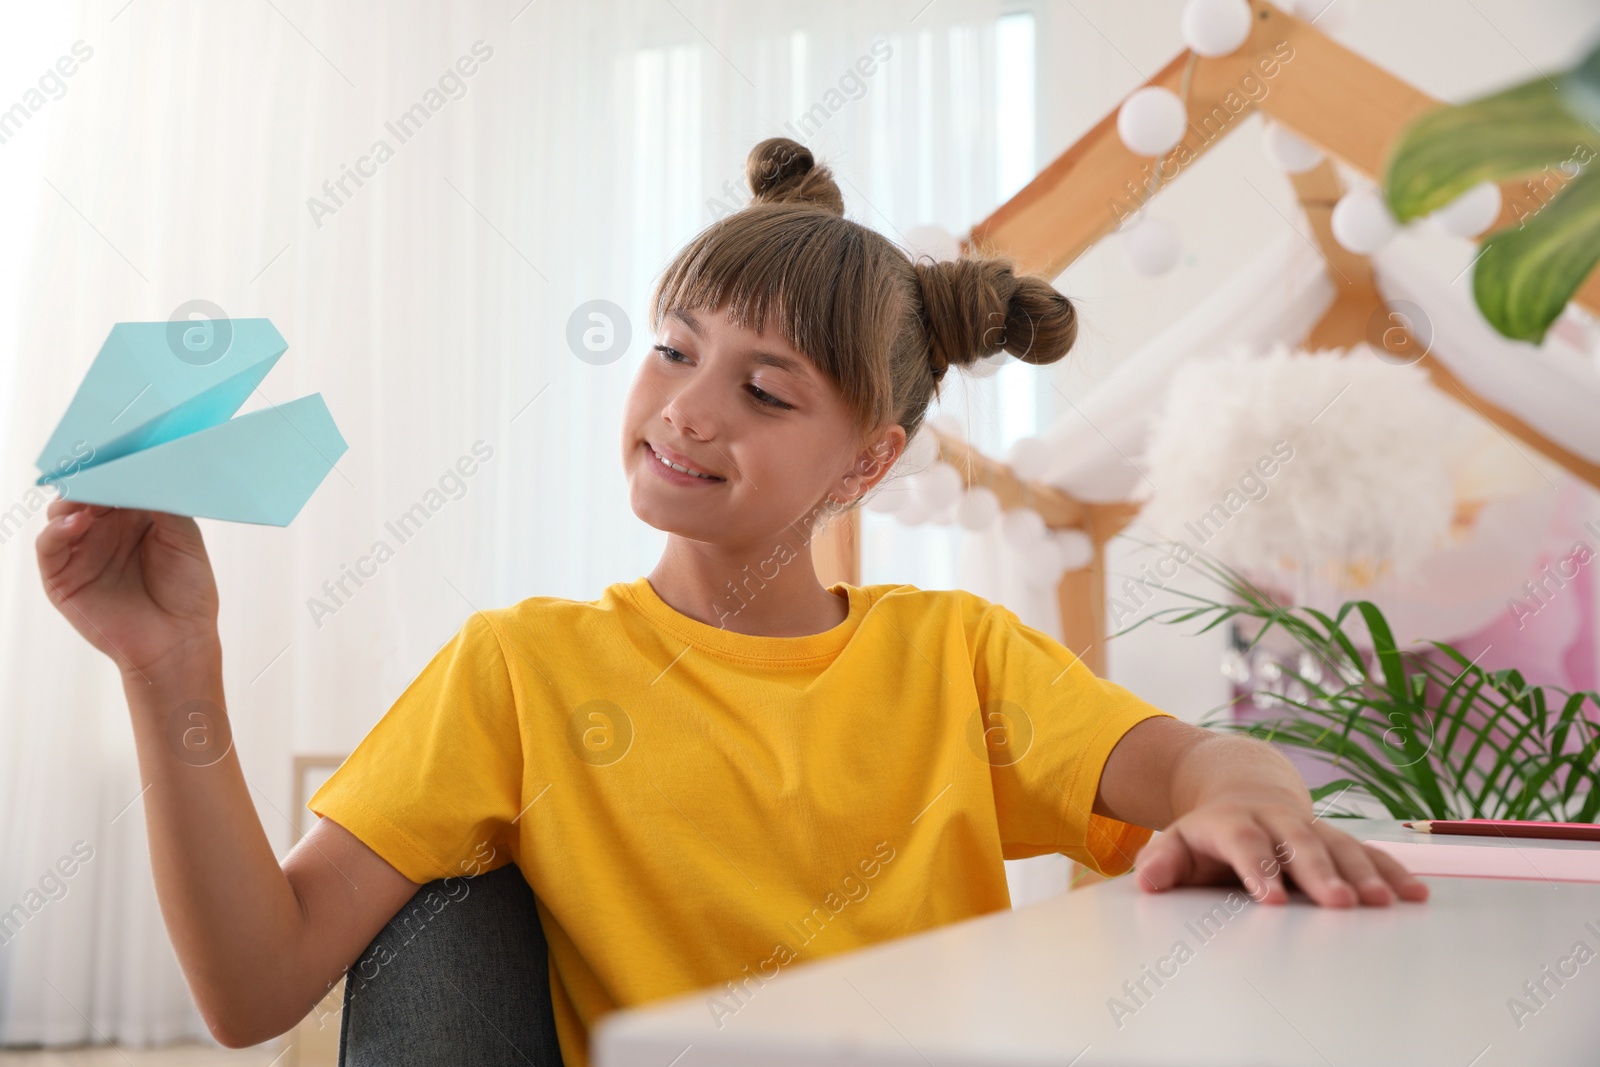 Photo of Cute little girl playing with paper plane at table in room